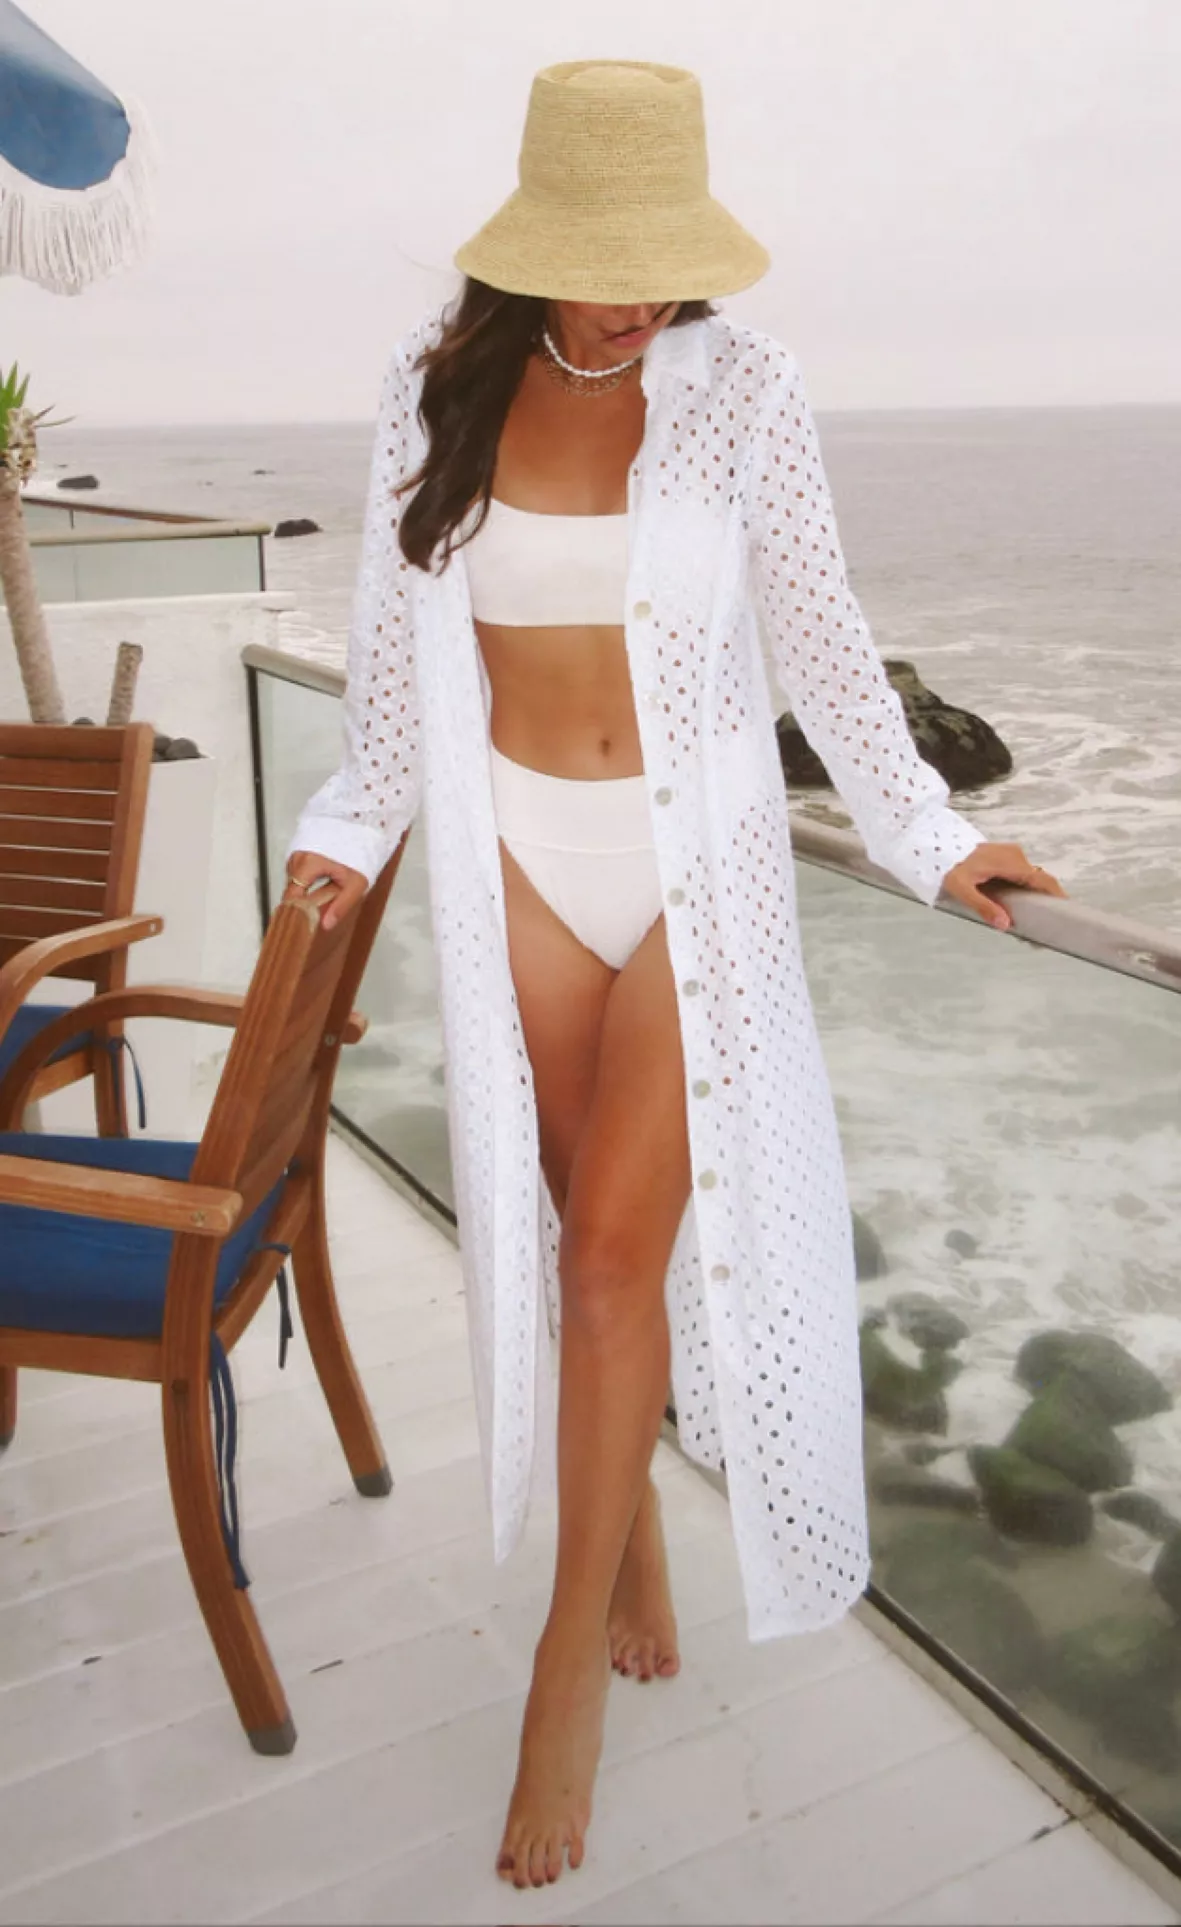 70+ Best Honeymoon Outfit Ideas You Can't Miss